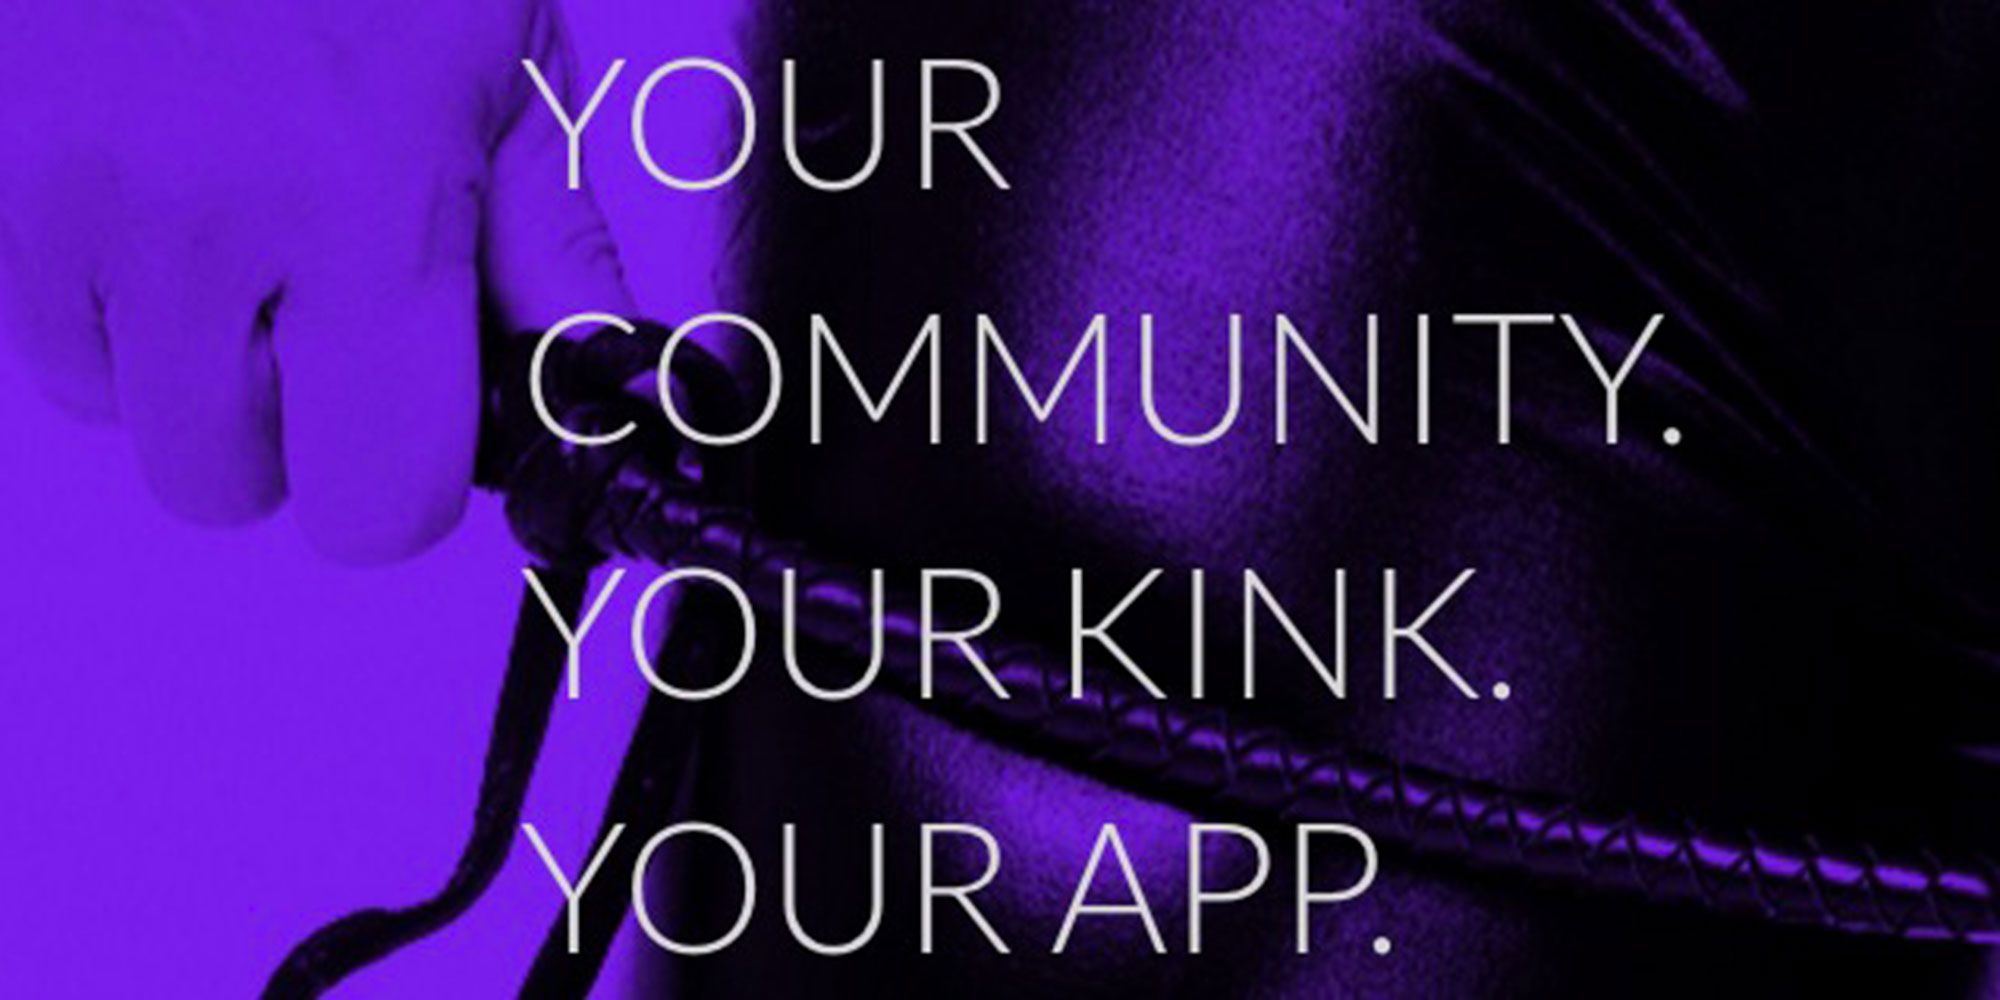 Whiplr - The Hot New App Designed for All Levels of Kink